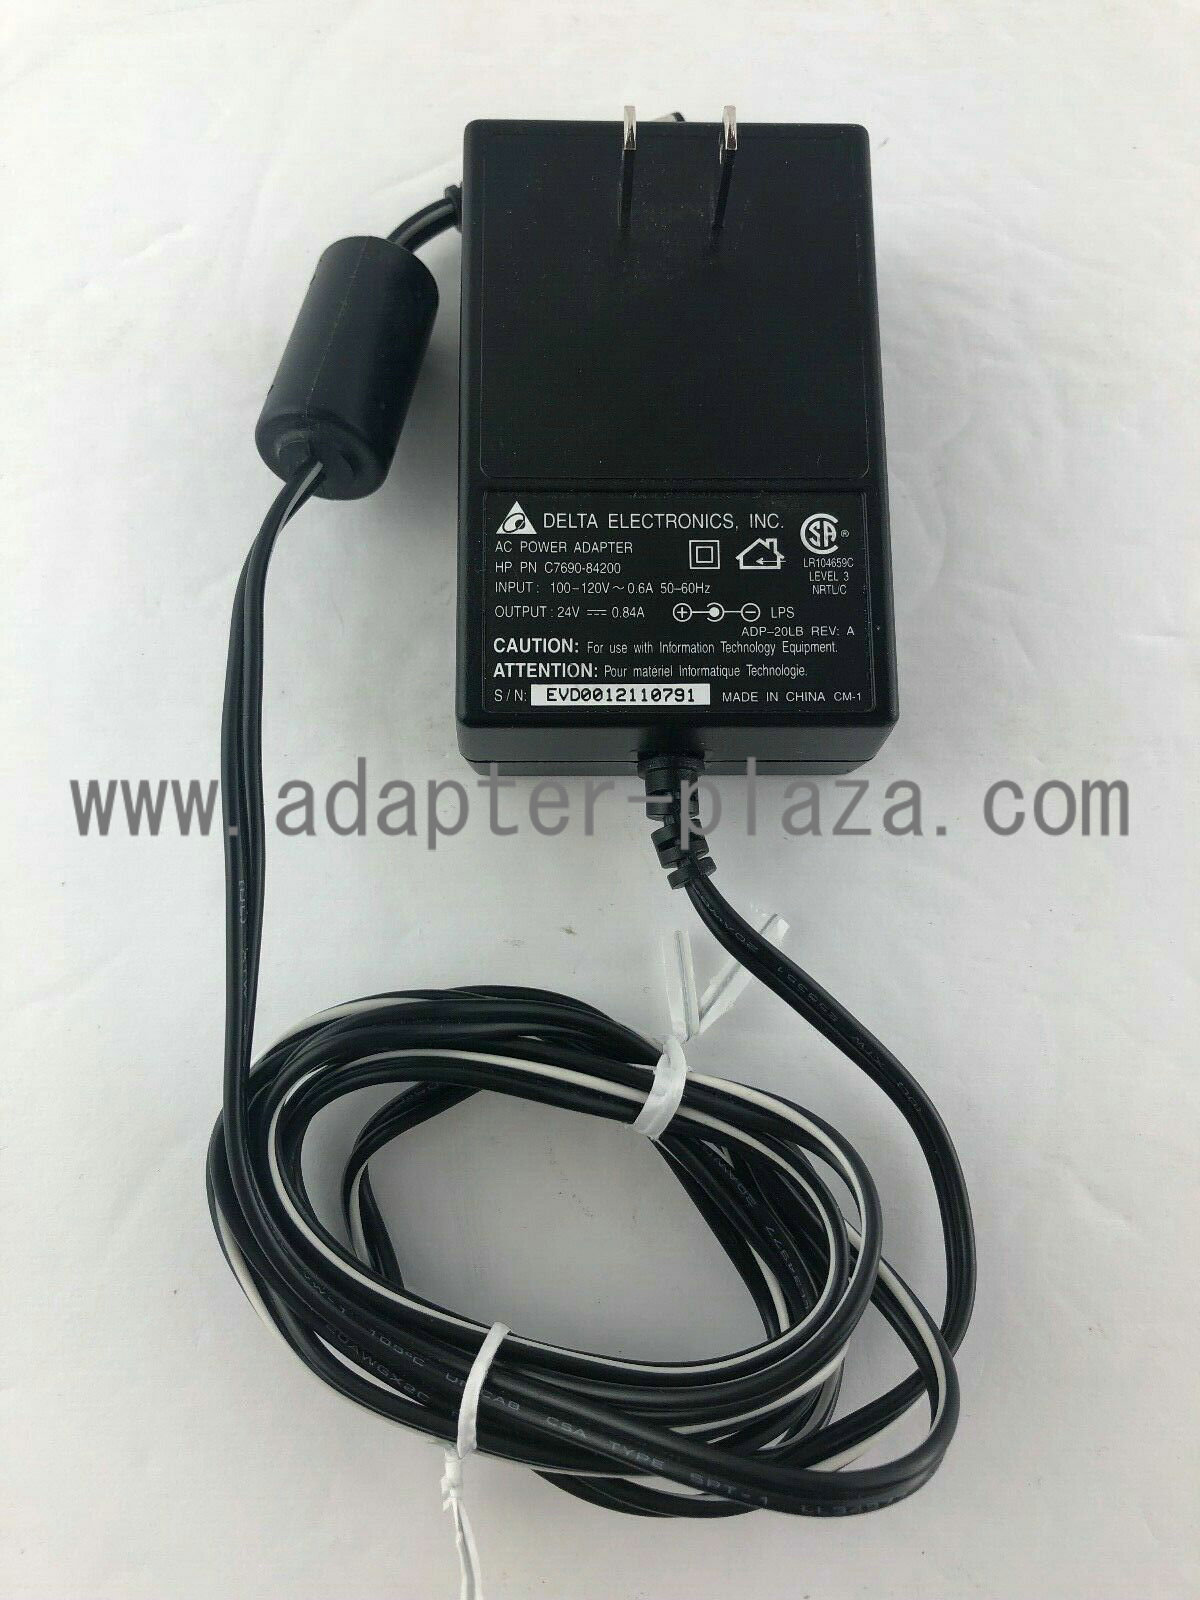 NEW Delta Electronics ADP-20LB Power Supply DC 24V 0.84A AC Adapter